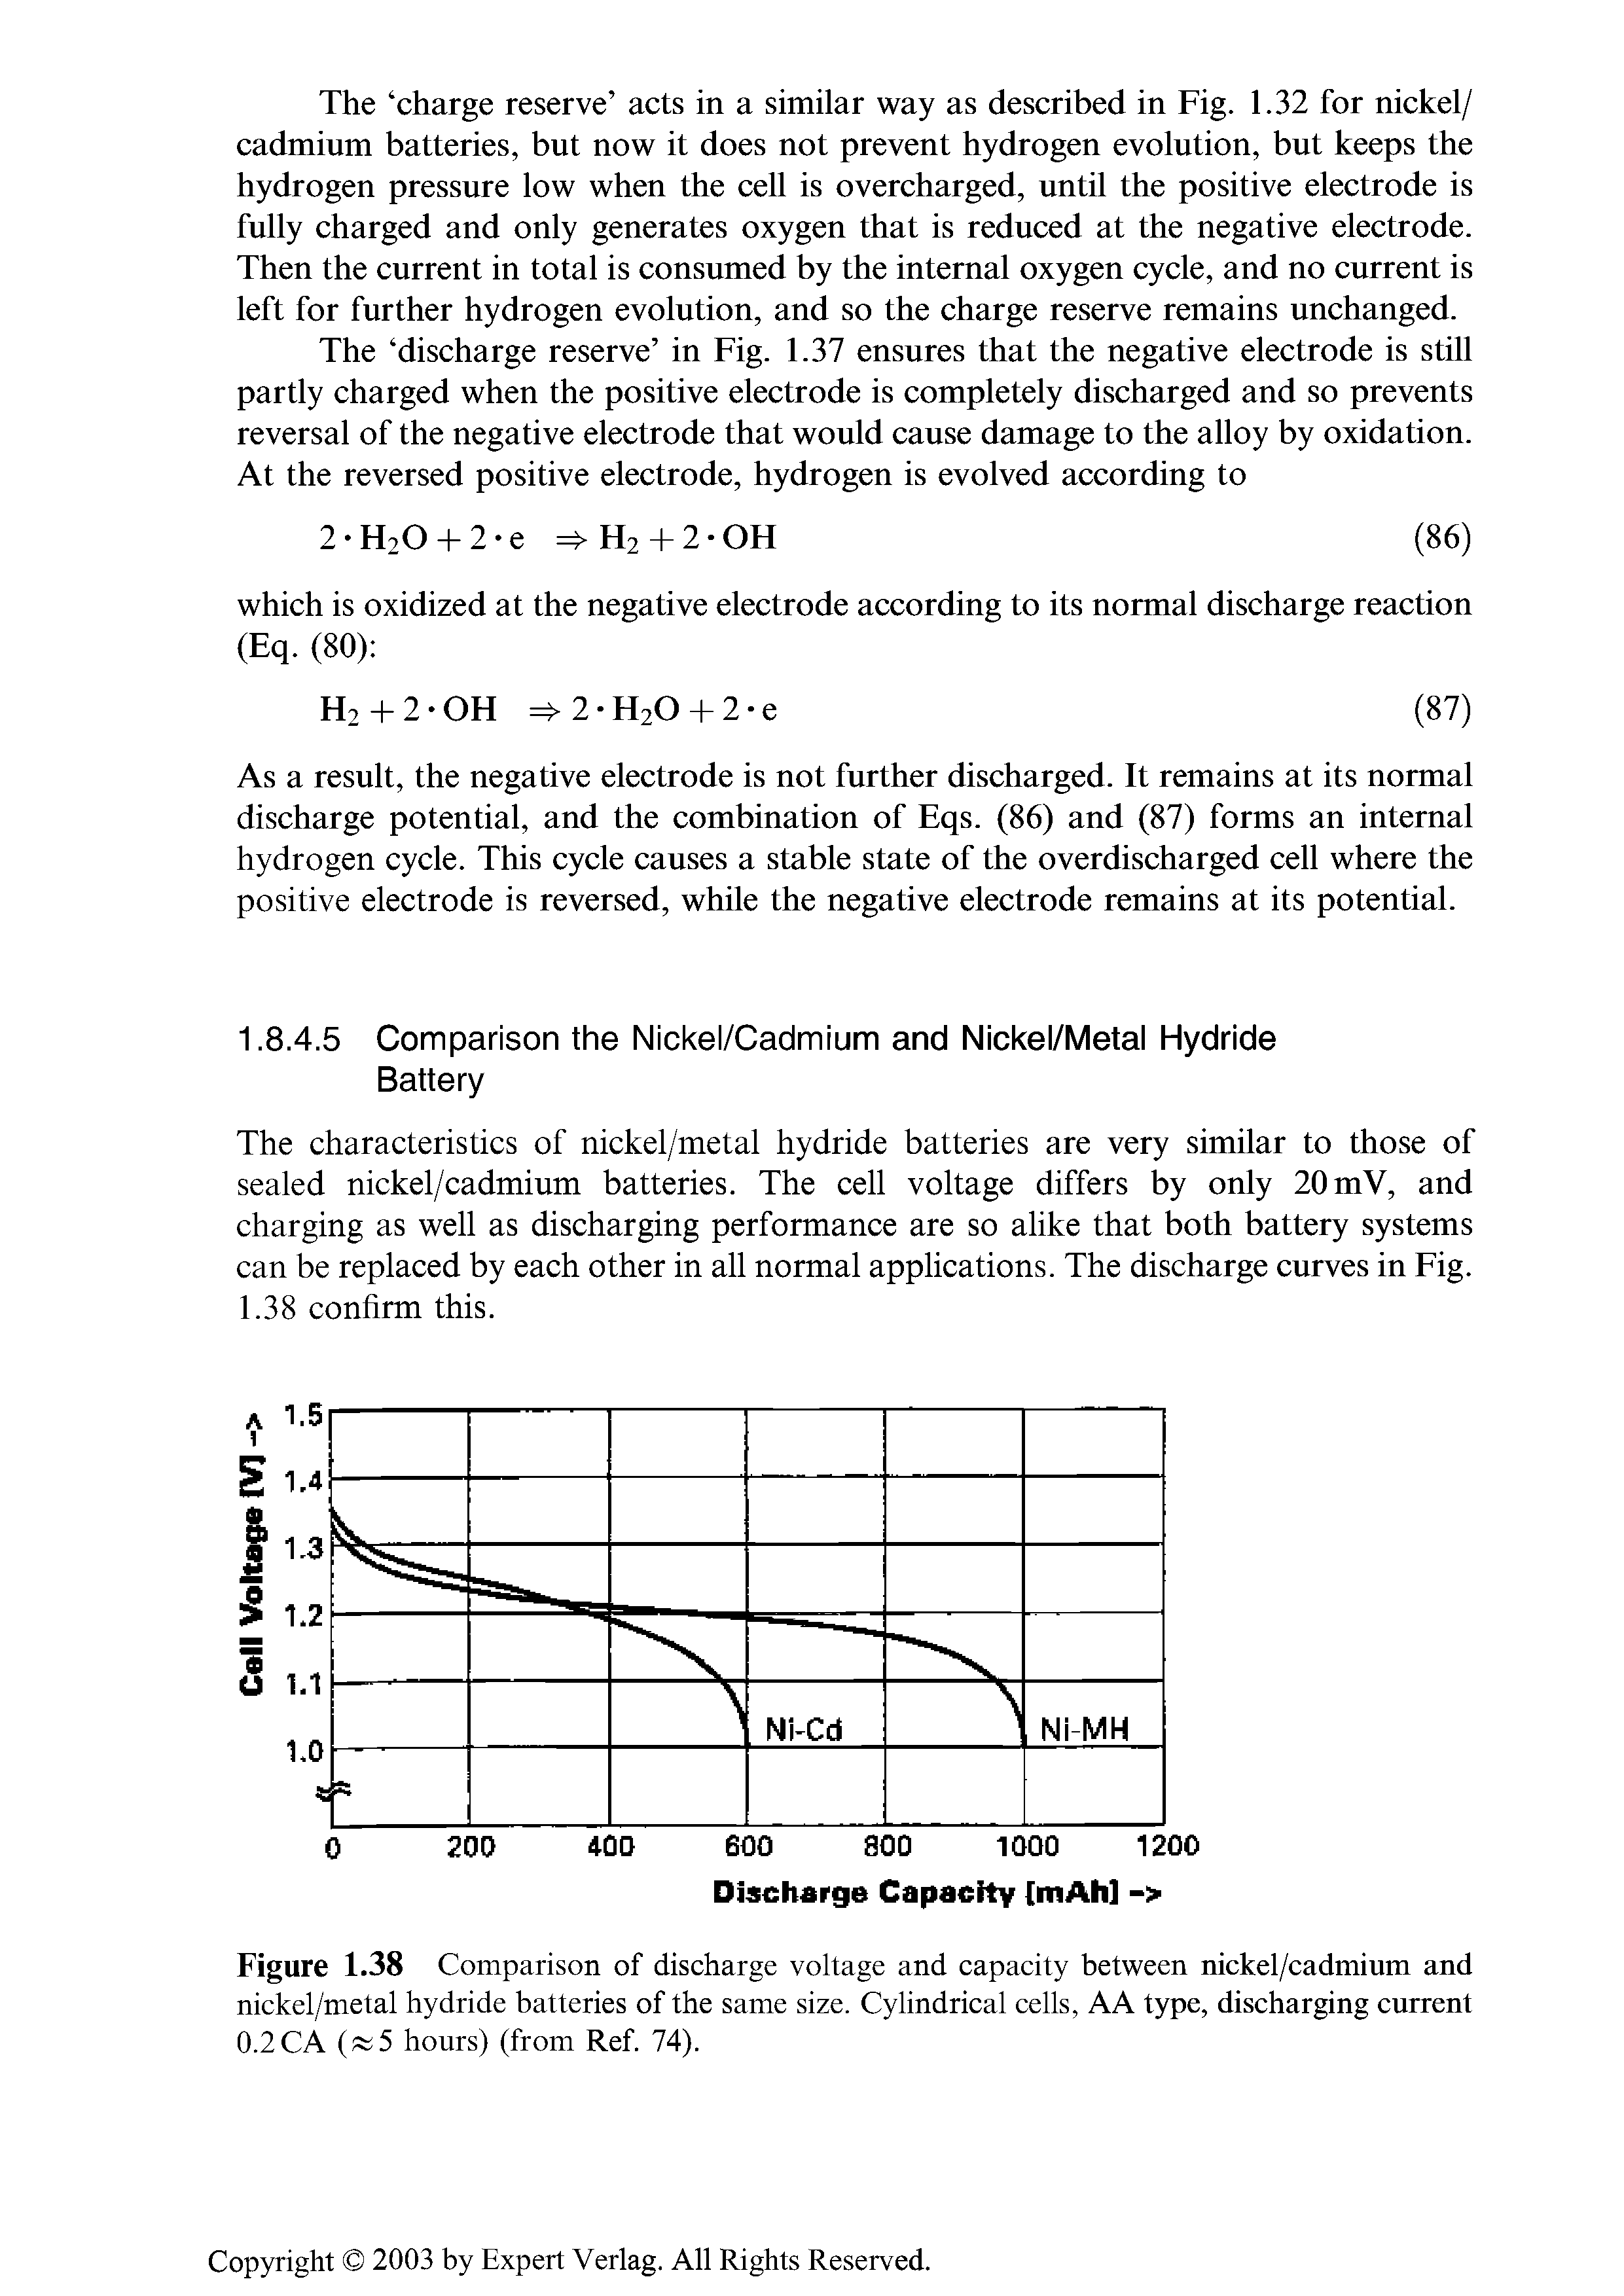 Figure 1.38 Comparison of discharge voltage and capacity between nickel/cadmium and nickel/metal hydride batteries of the same size. Cylindrical cells, AA type, discharging current 0.2CA ( 5 hours) (from Ref. 74).